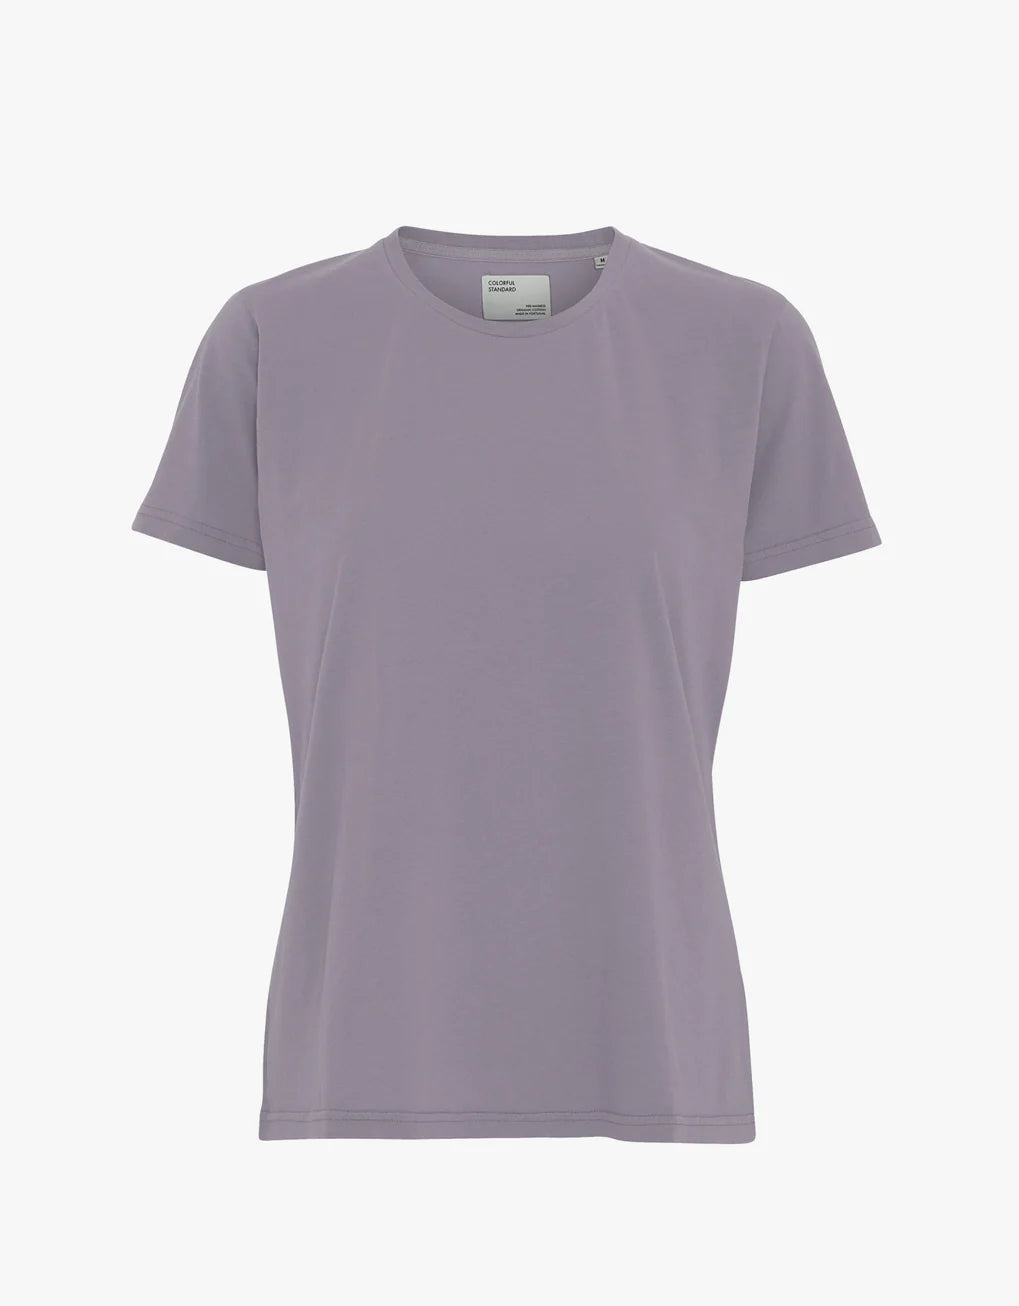 A Light Organic Tee made from machine washable organic cotton. (Brand: Colorful Standard)